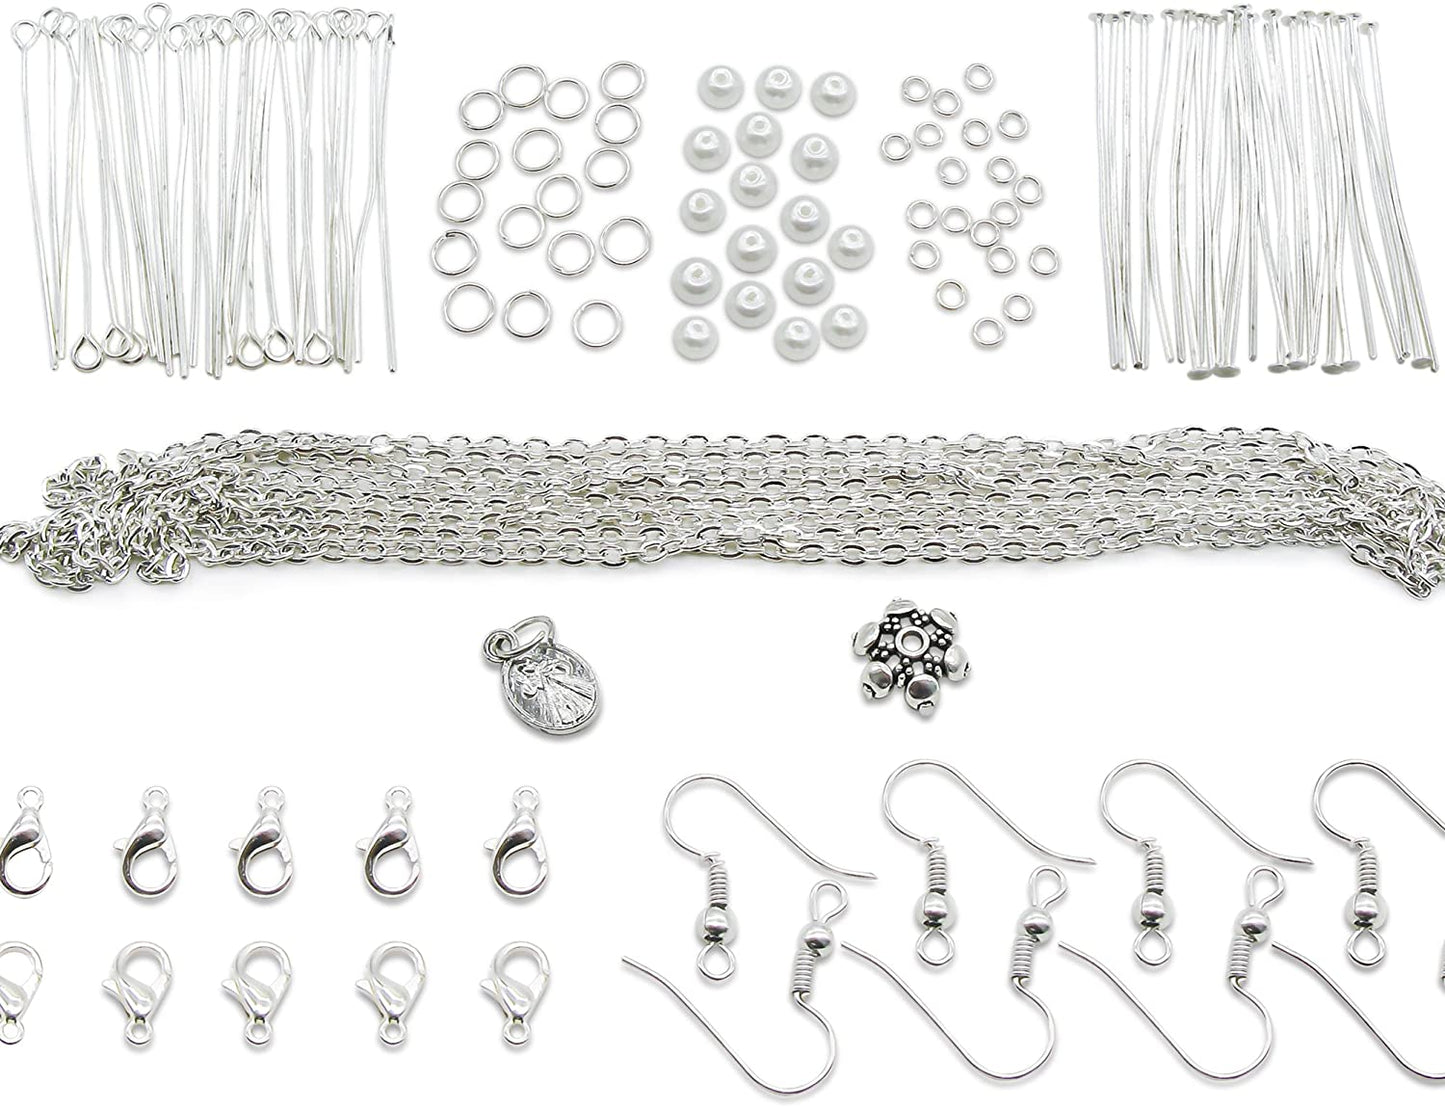 TOAOB 253pcs Jewelry Making Kit with Earring Hooks Chains Jump Rings Pins Charm Beads Jewelry Accessories for Necklaces Bracelets Earrings Making and Repairing - (For 12 piece(s))